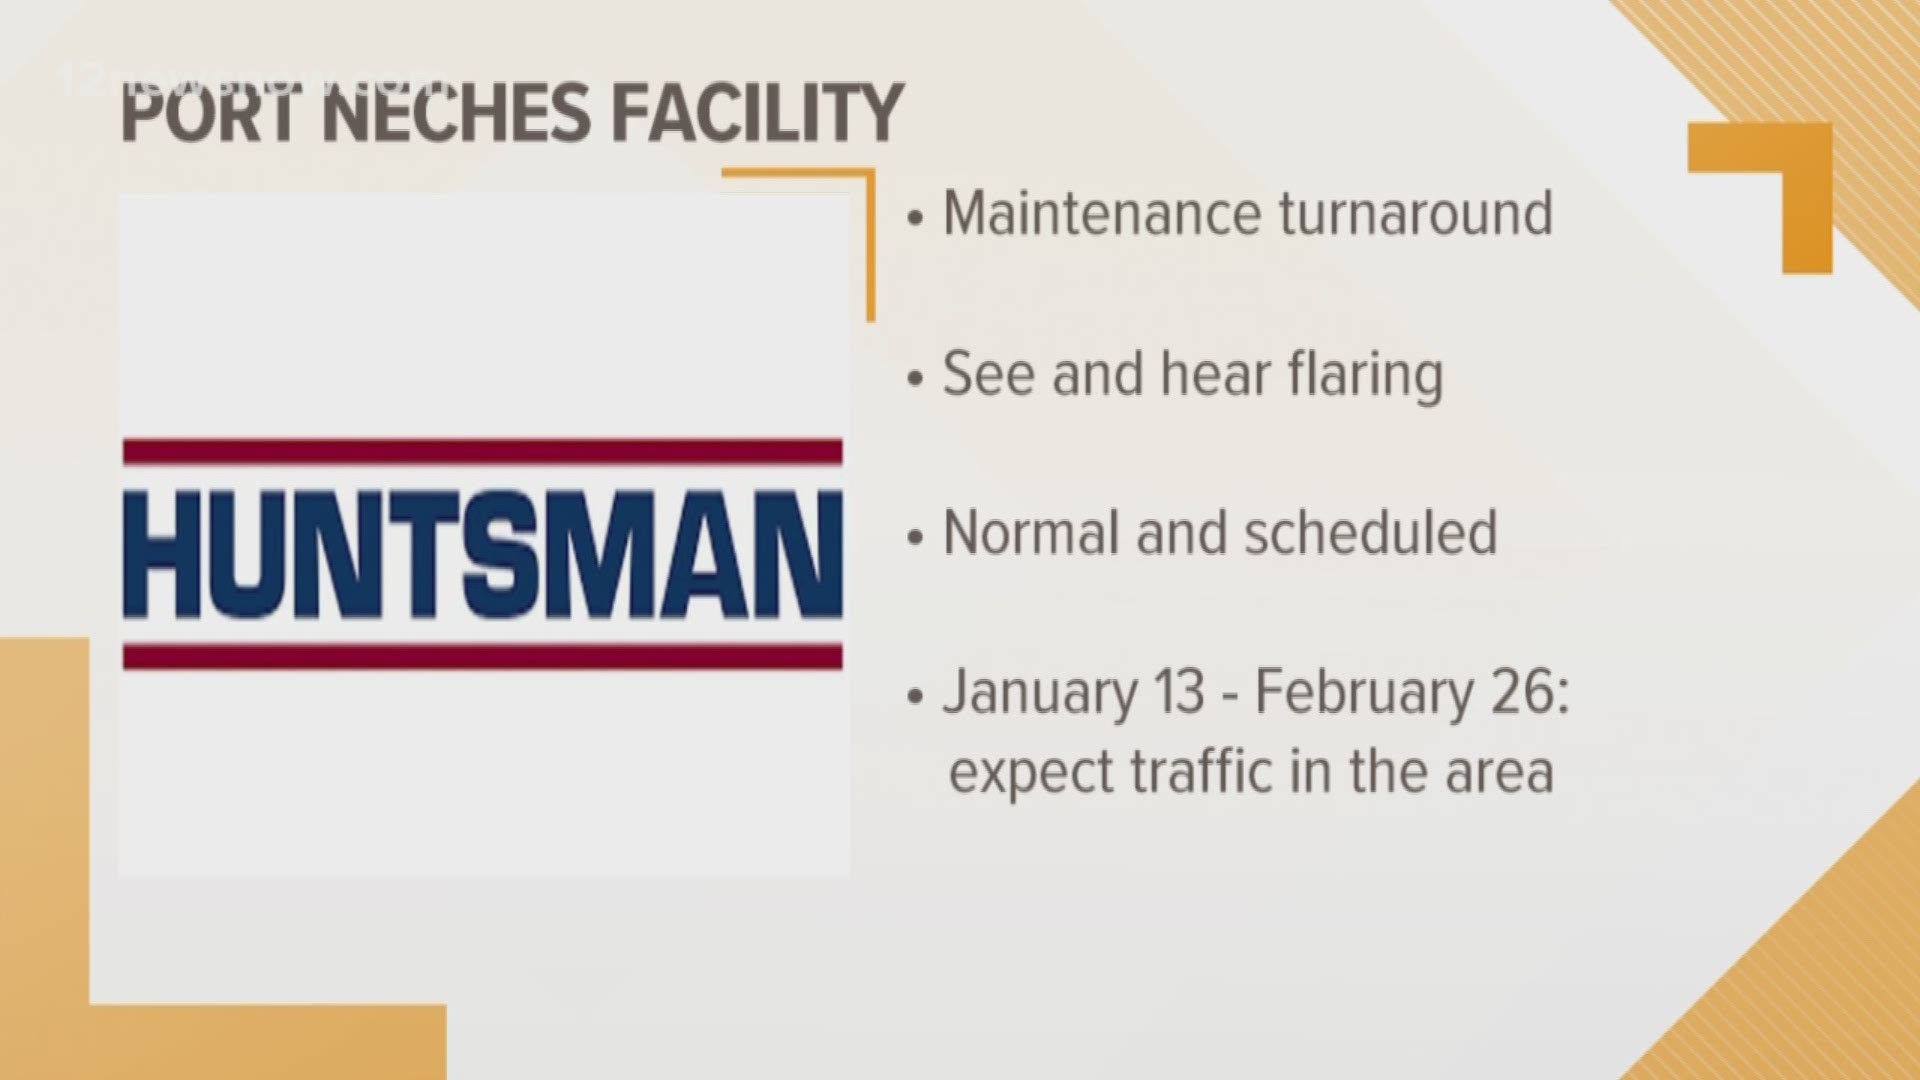 Huntsman Port Neches Operations facility is preparing for a ‘maintenance turnaround,” scheduled to last from Dec. 10, 2019 until Jan 12. 2020.